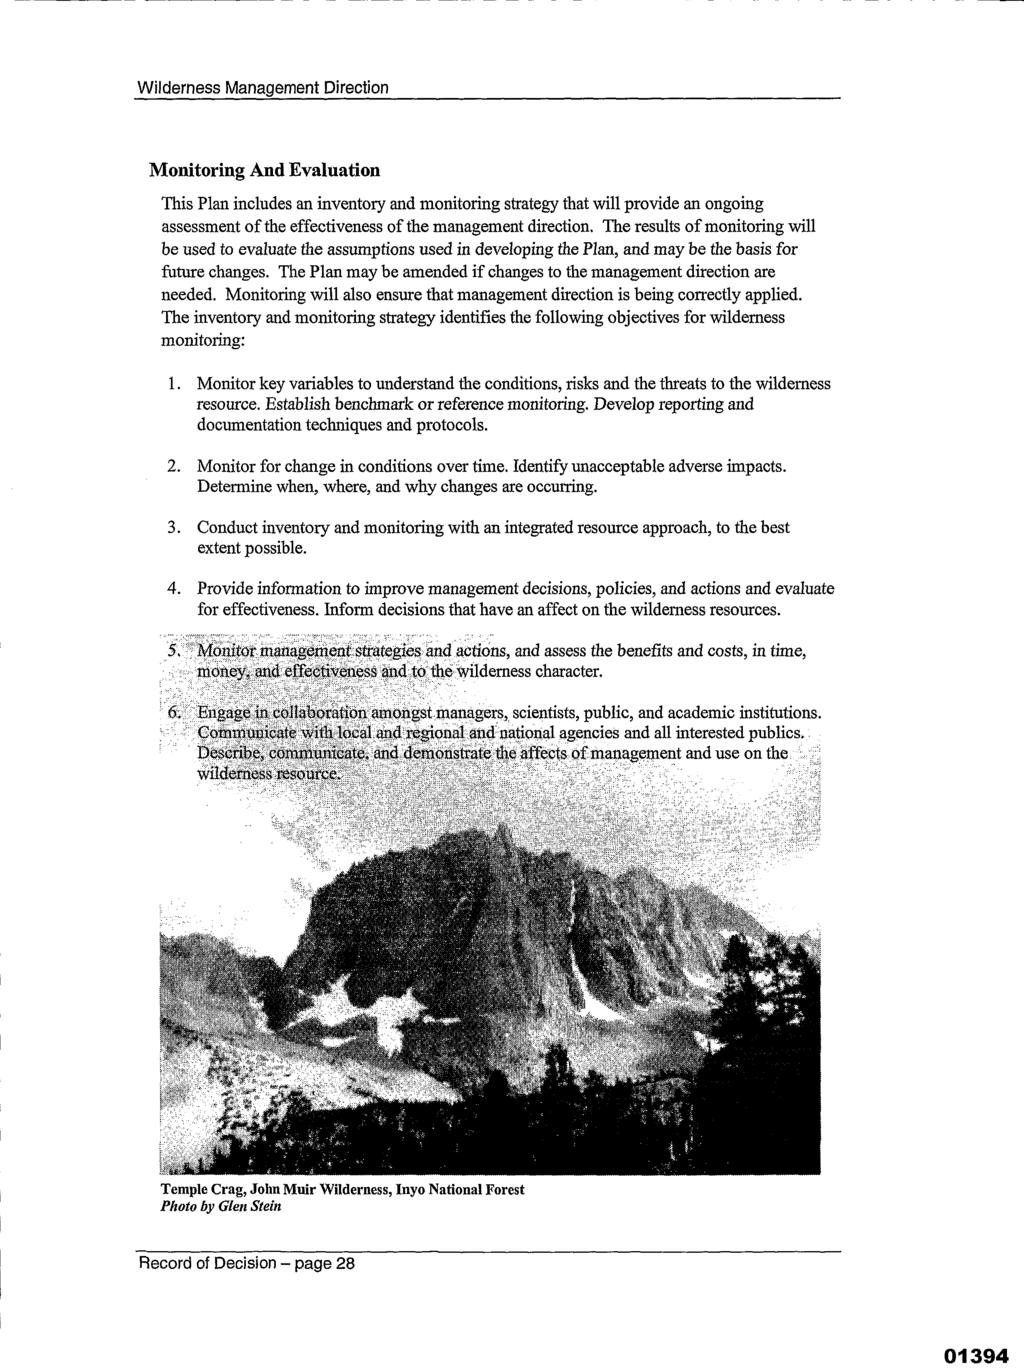 WILDERNESS MANAGEMENT DIRECTION MONITORING AND EVALUATION THIS PLAN INCLUDES AN INVENTORY AND MONITORING STRATEGY THAT WILL PROVIDE AN ONGOING ASSESSMENT OF THE EFFECTIVENESS OF THE MANAGEMENT